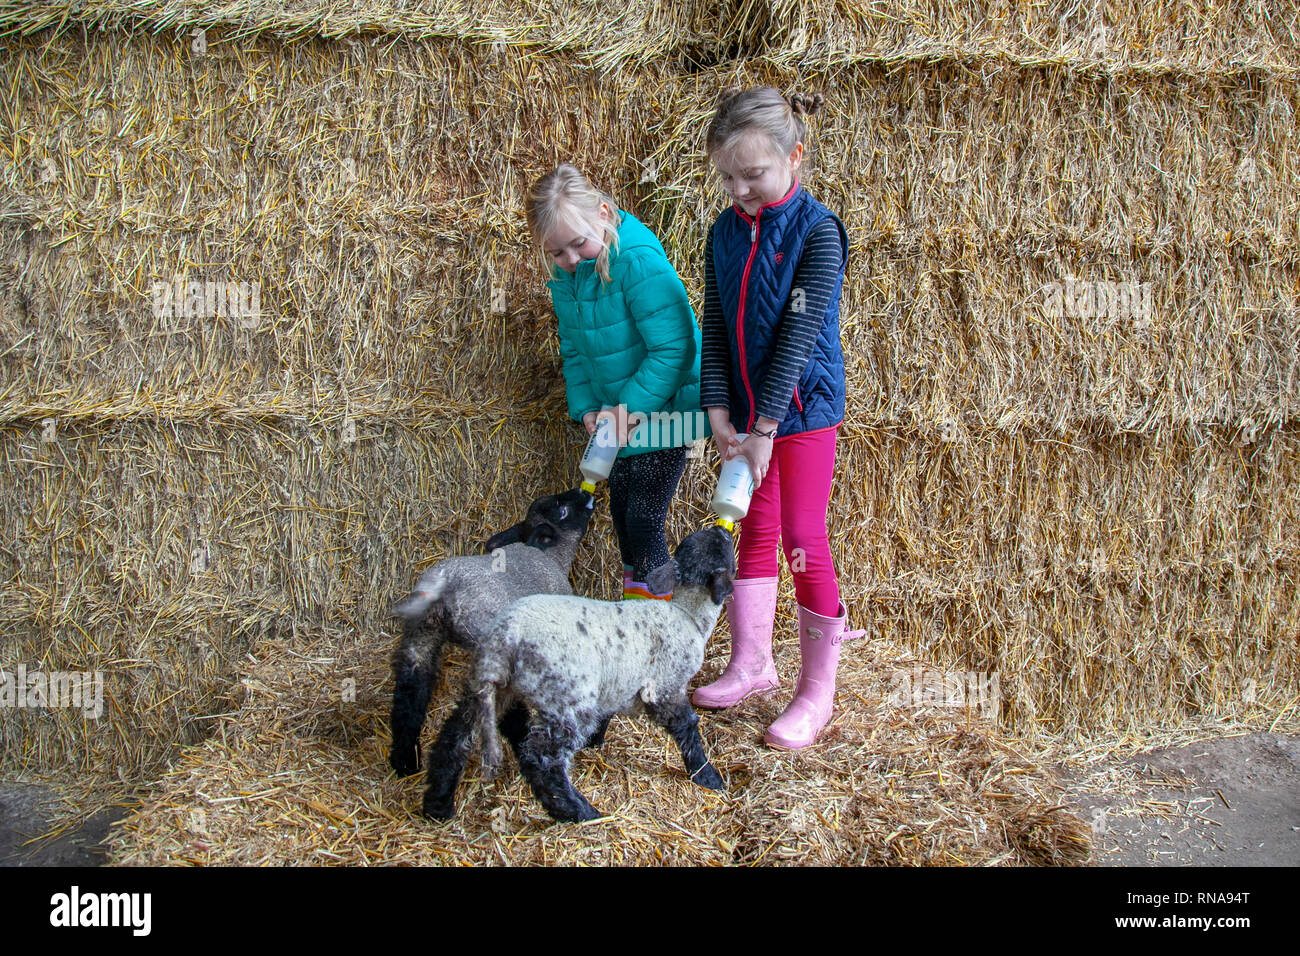 Burscough, Lancashire, UK. 18th February, 2019. Lambing time at the Animal Farm as Kasey Webster, 5 years old, & Maddie Slinger 7 years old, help with the care of lambs that have been orphaned, by feeding the animals which would otherwise die. Credit: MediaWorldImages/AlamyLiveNews. Stock Photo